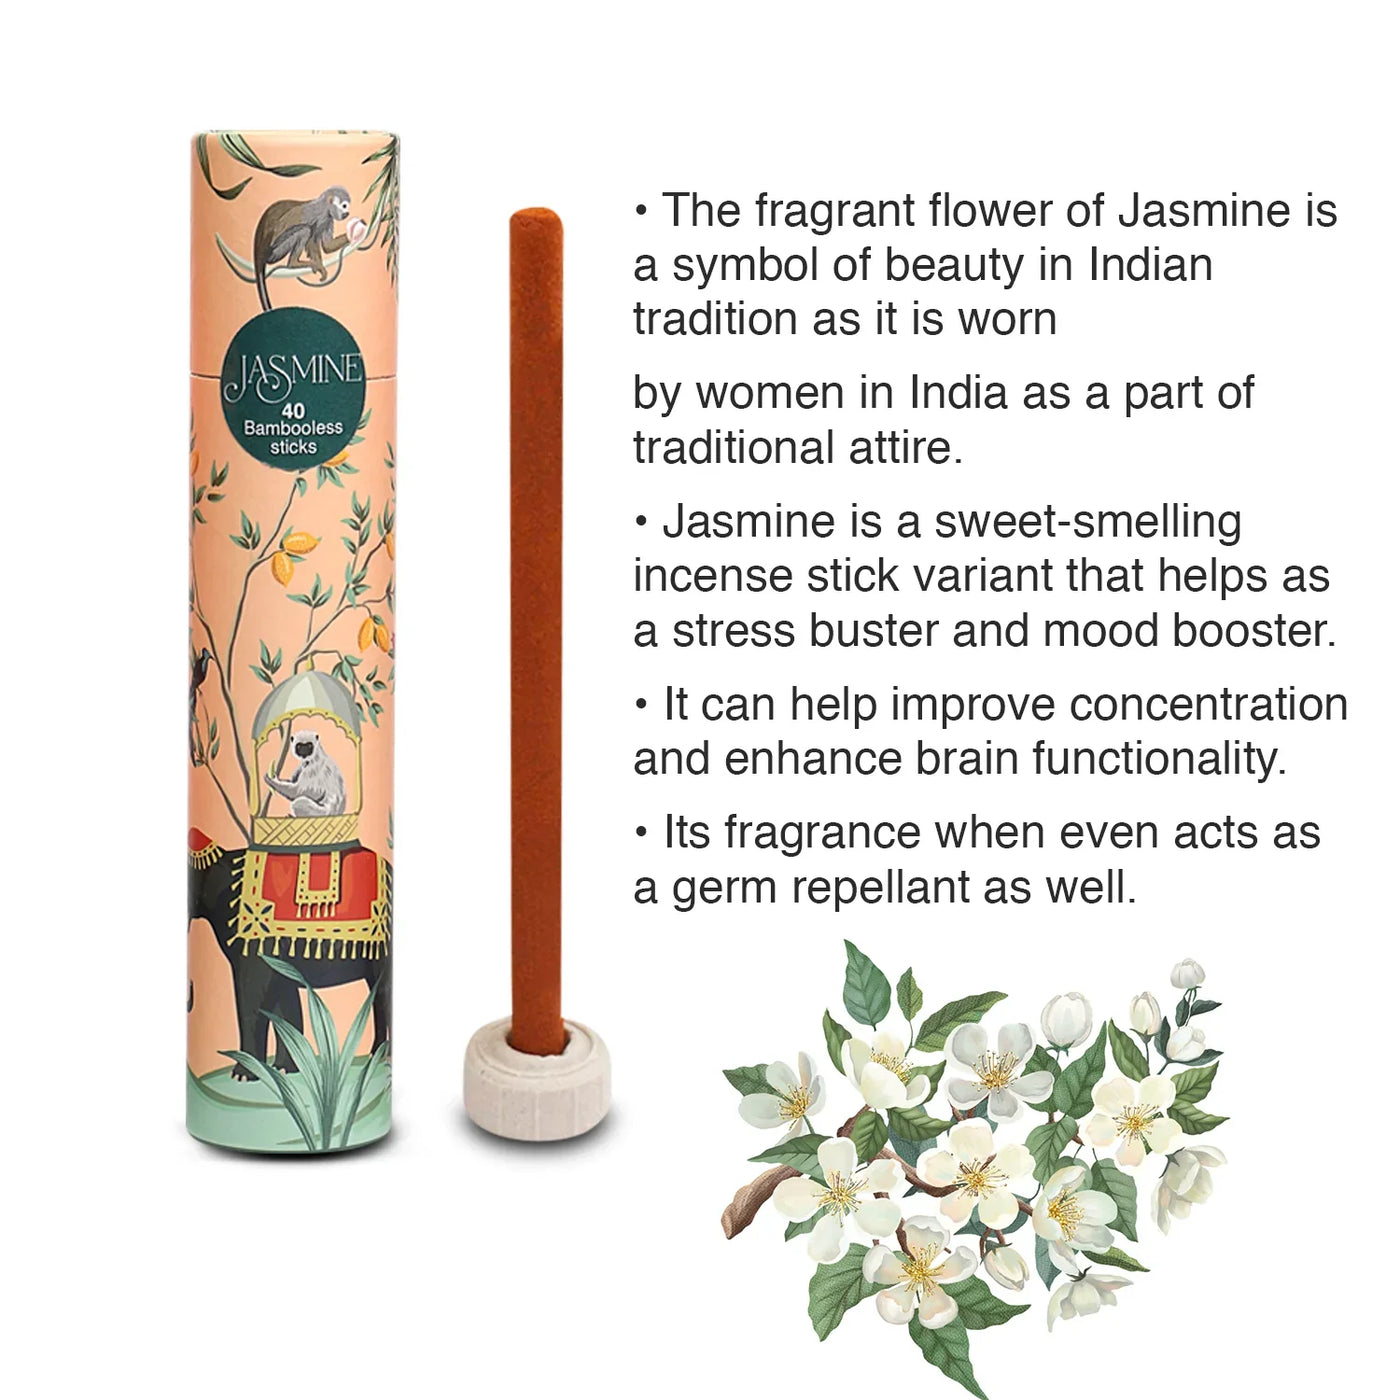 Sacred Life Bamboo Less Incense Value for Price Combo Pack of 4 - PRISONS OF INDIA